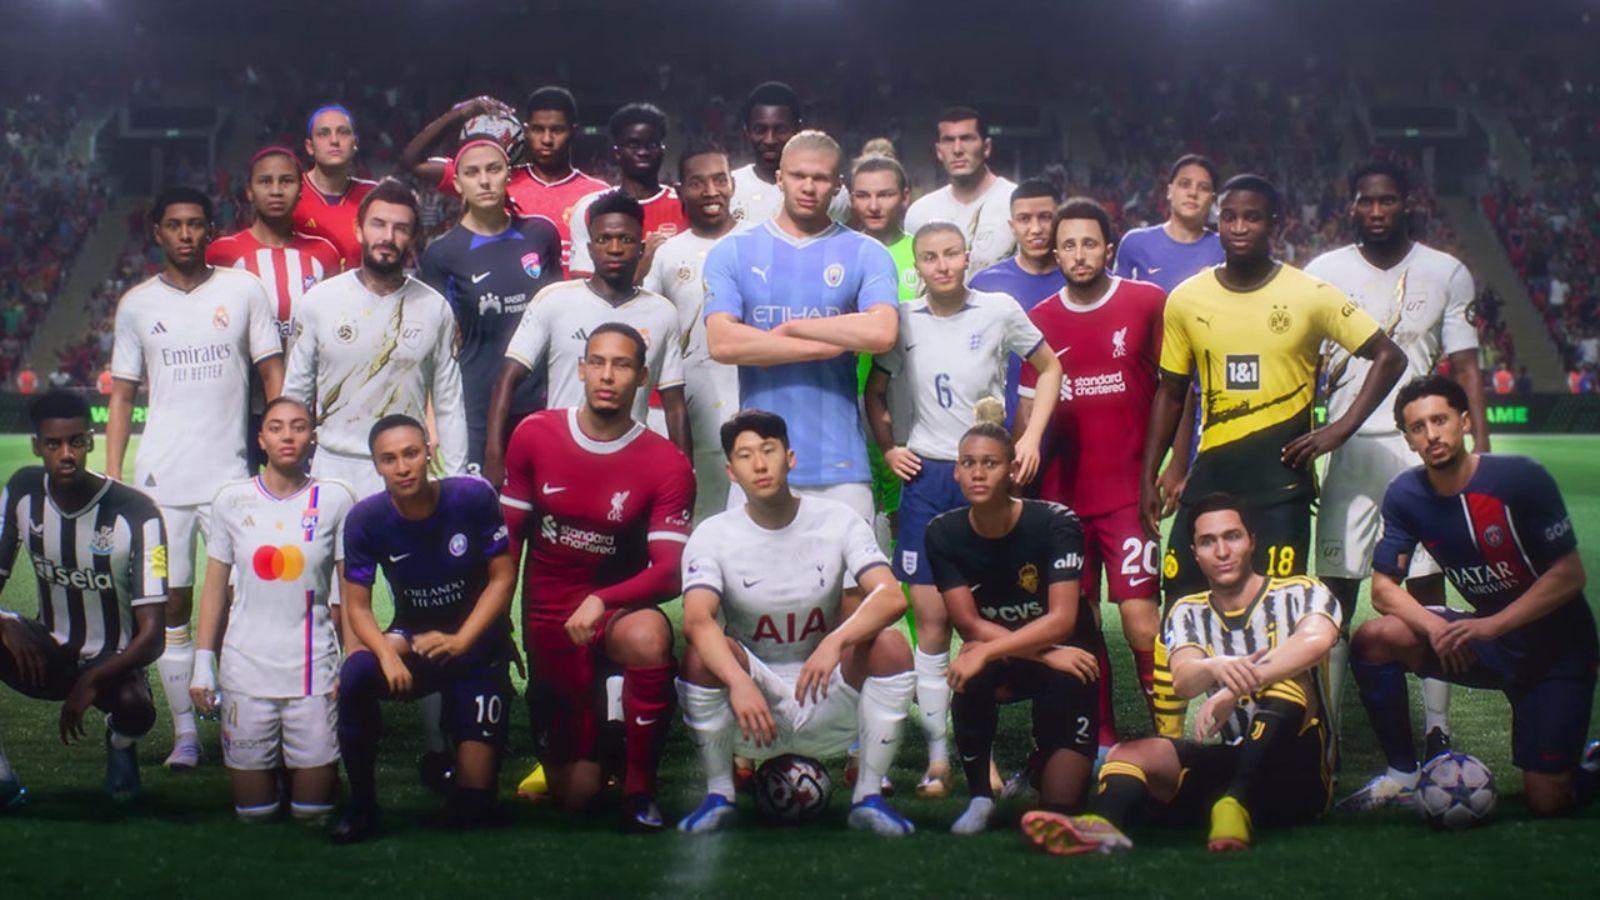 EA FC 24: All new Ultimate Team features - Charlie INTEL